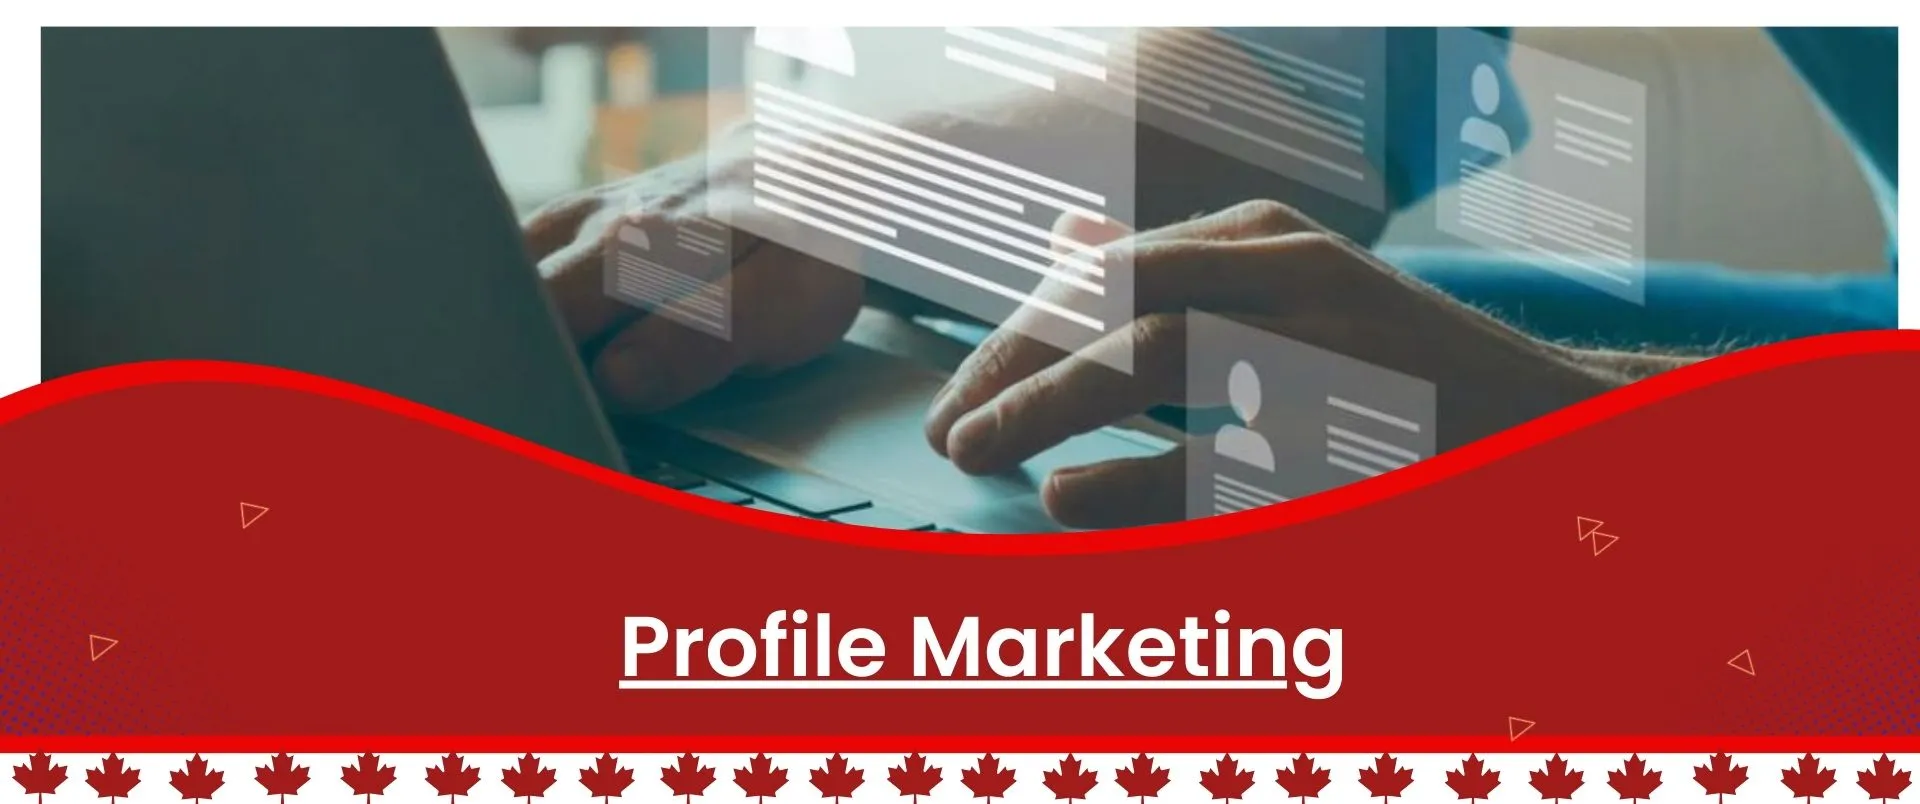 Jobs in Canada for Indians working on laptops for profile marketing